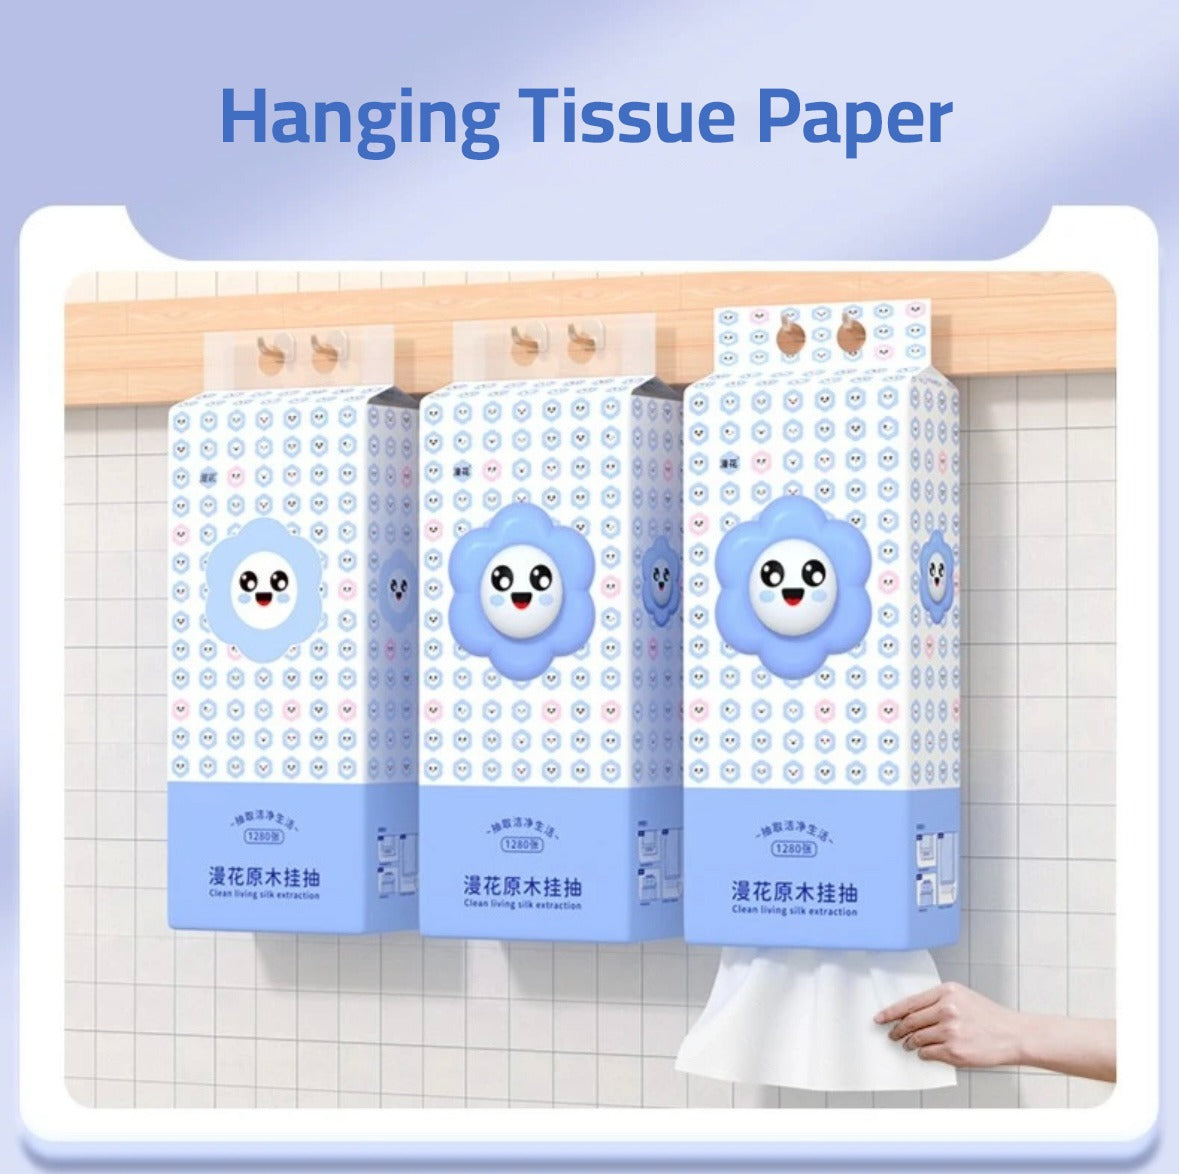 Three sets of Wood Pulp Tissue Papers hanging on a wall and a person pulling out a tissue from it 